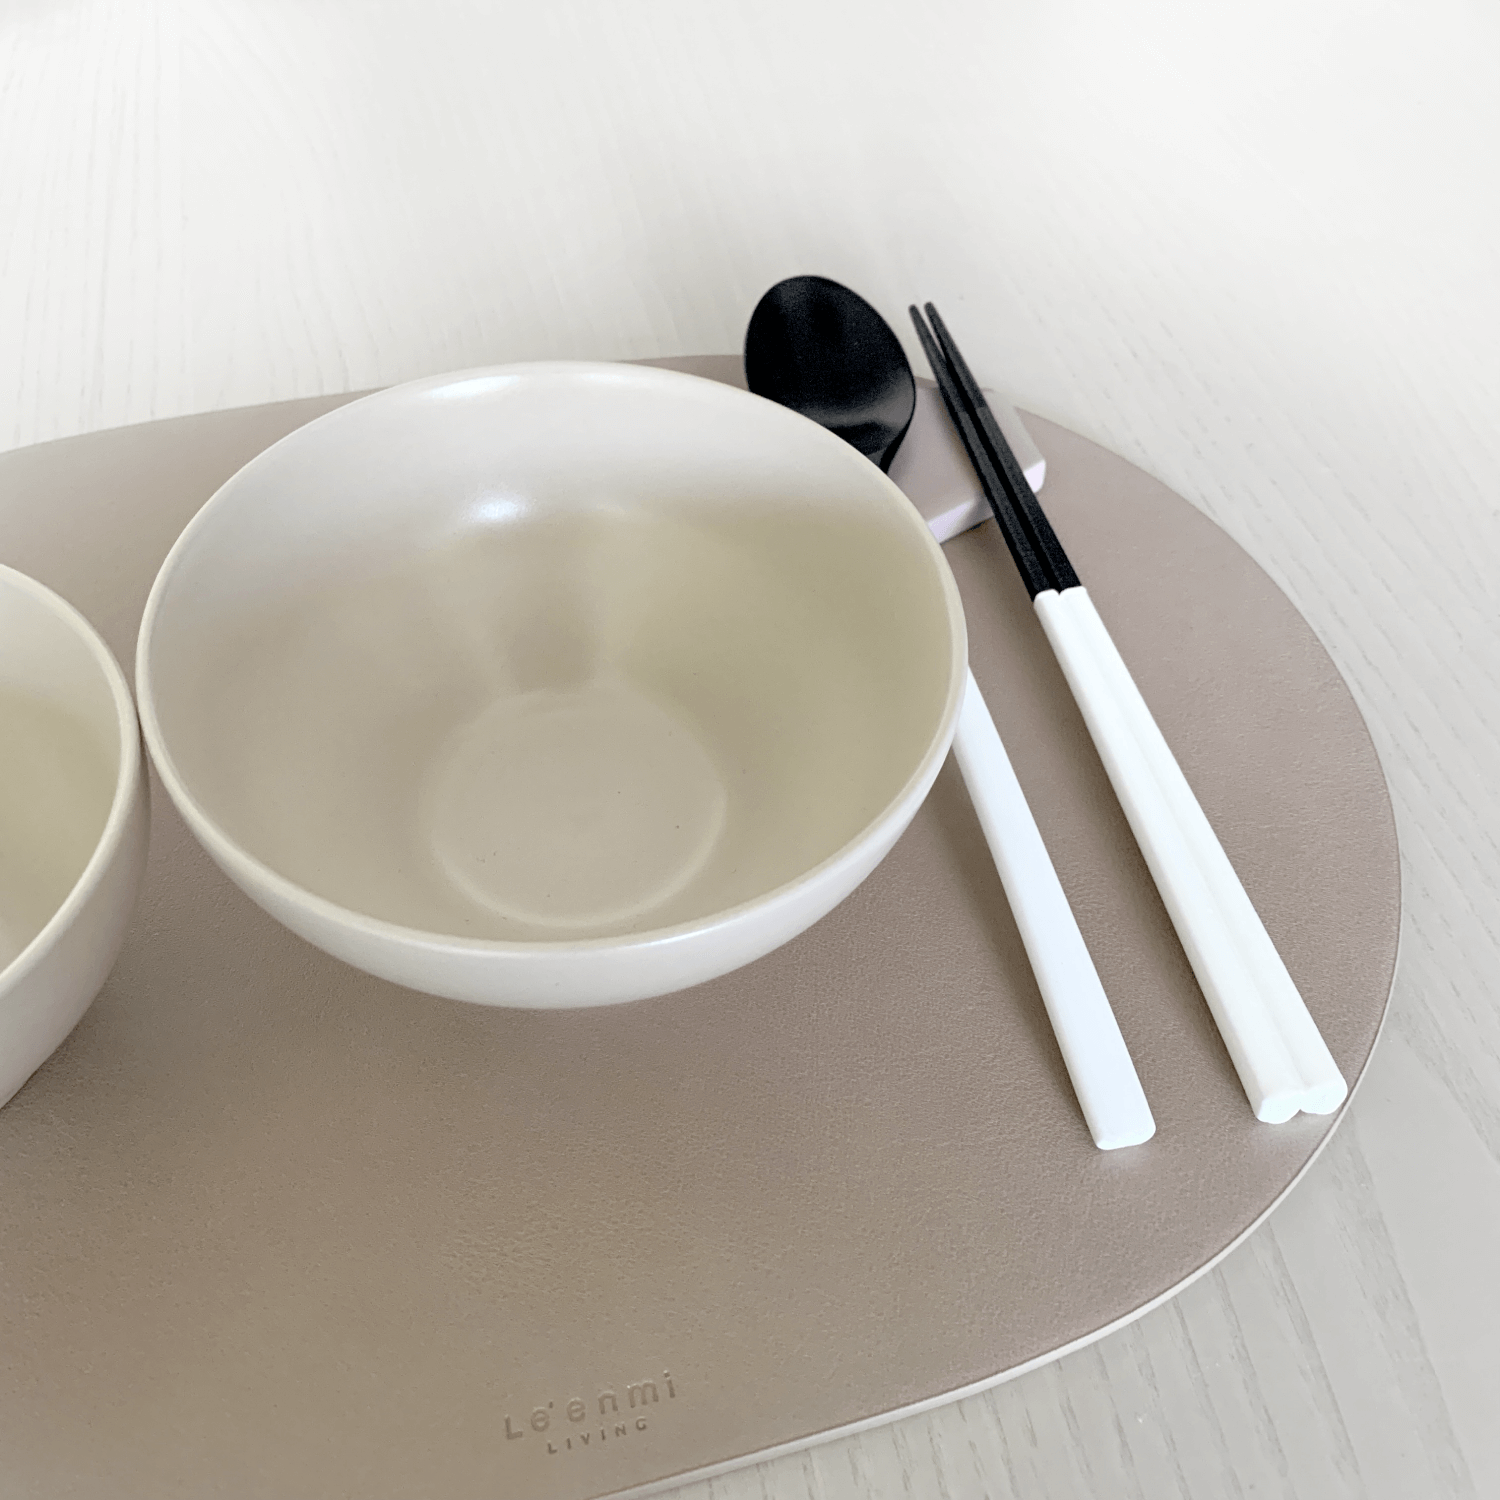 Le'enmi Oval Double-Sided Leather Tray - 르엔미 양면 방수 타원